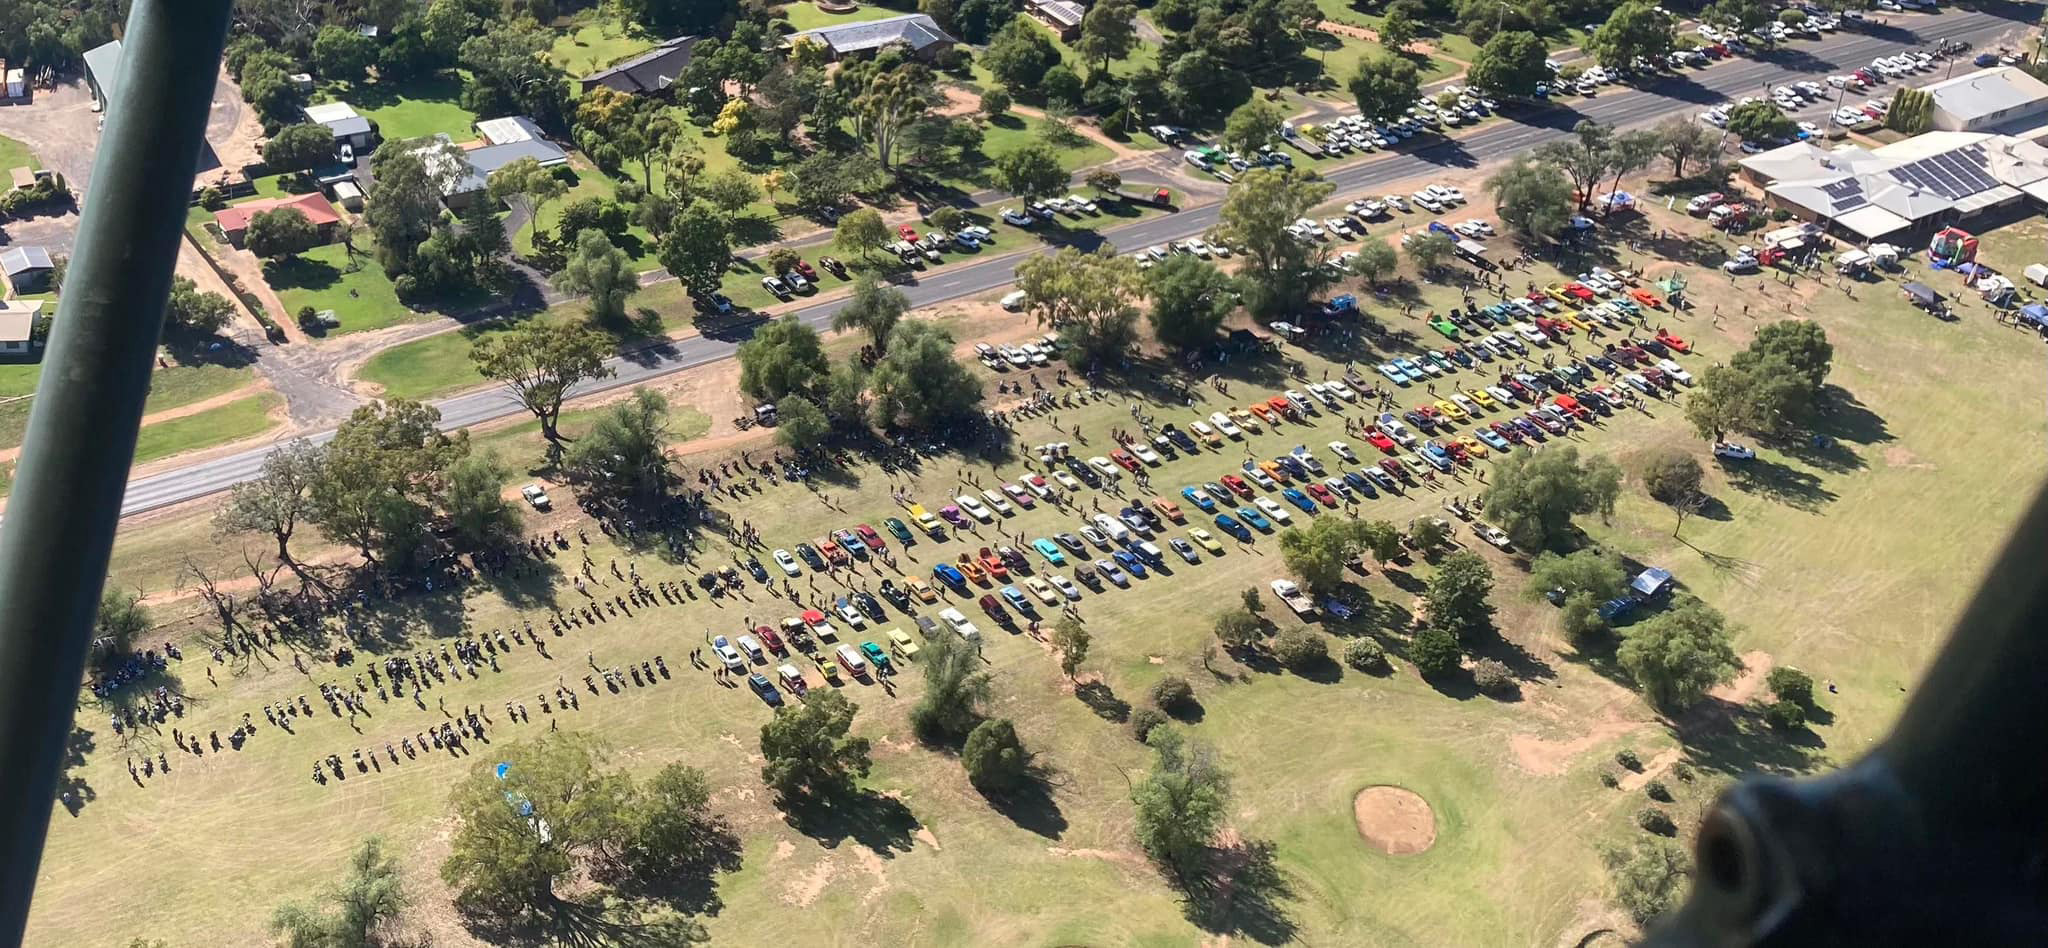 Aerial view of the Narromine Car Show